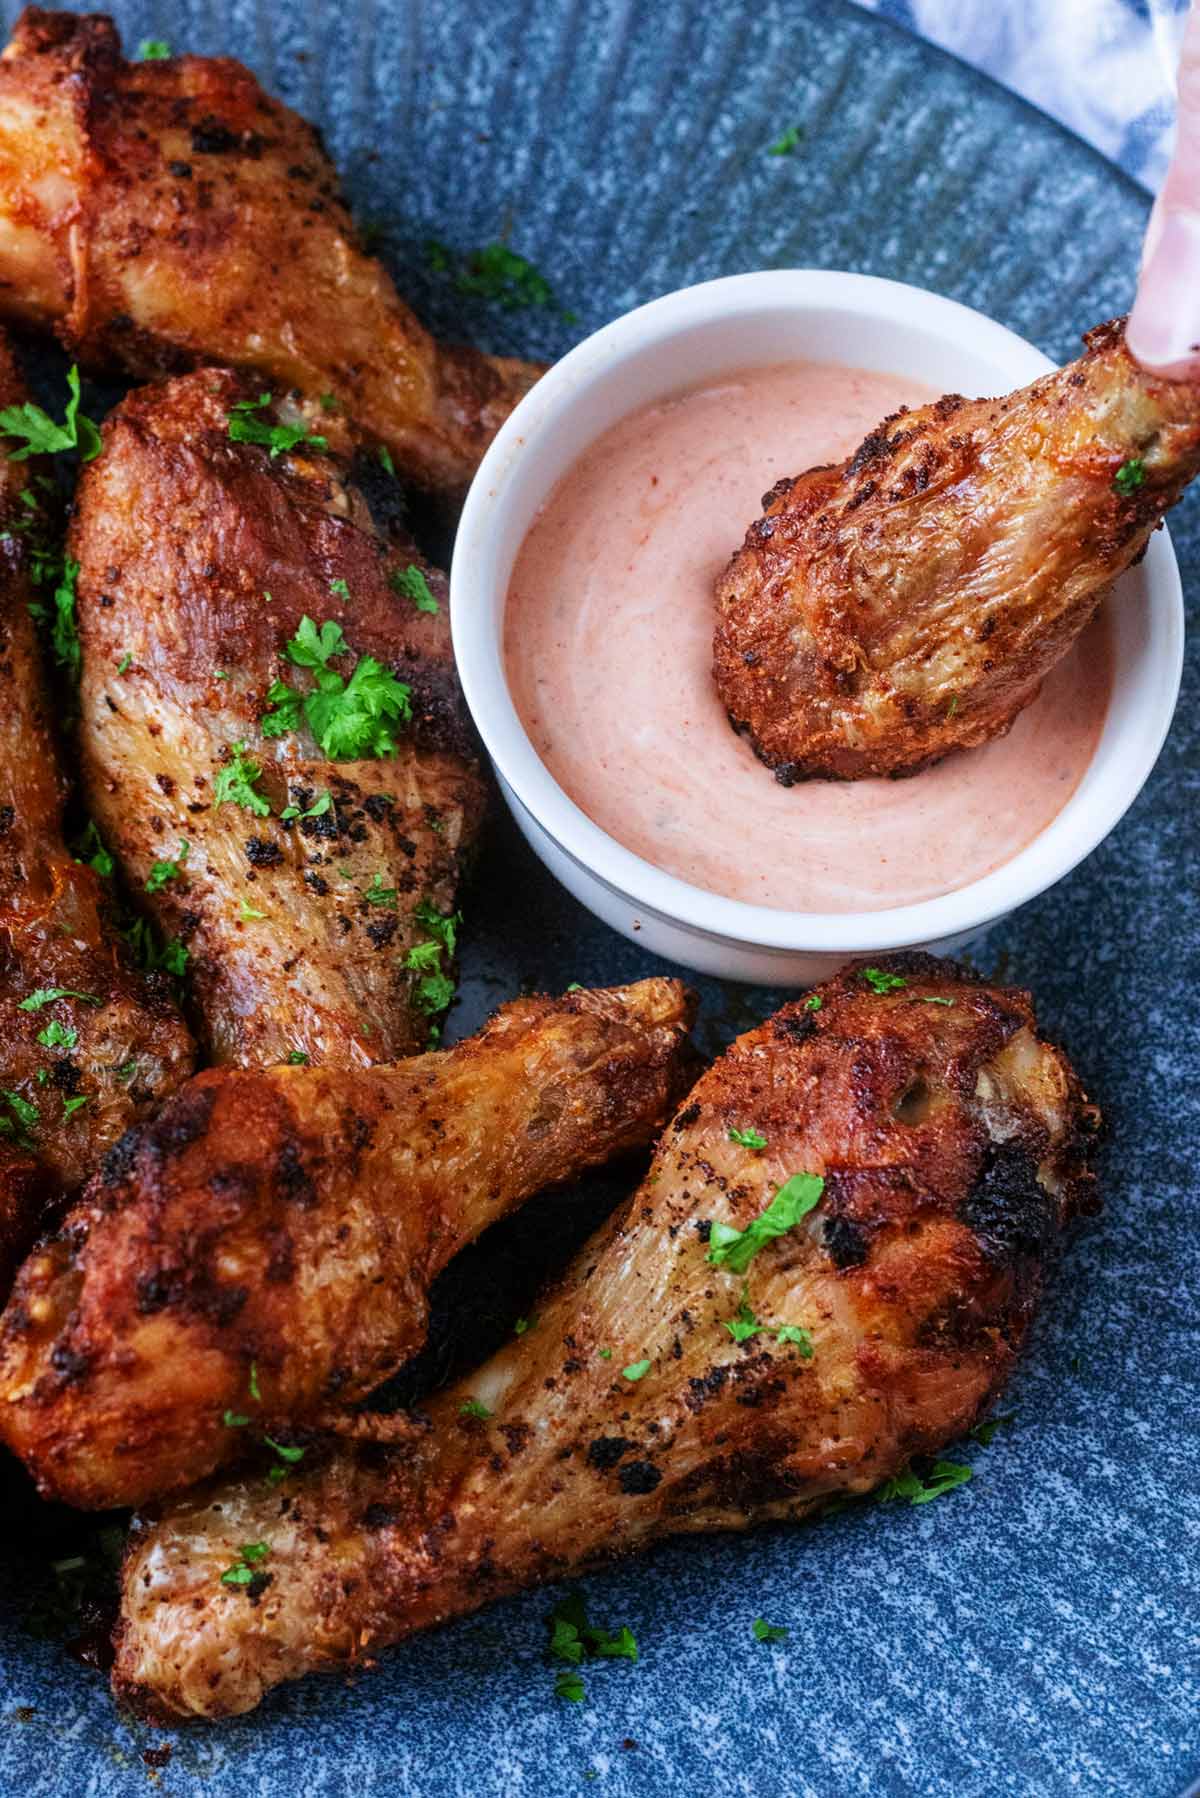 A cooked chicken drumstick being dipped in a small pot of sauce.